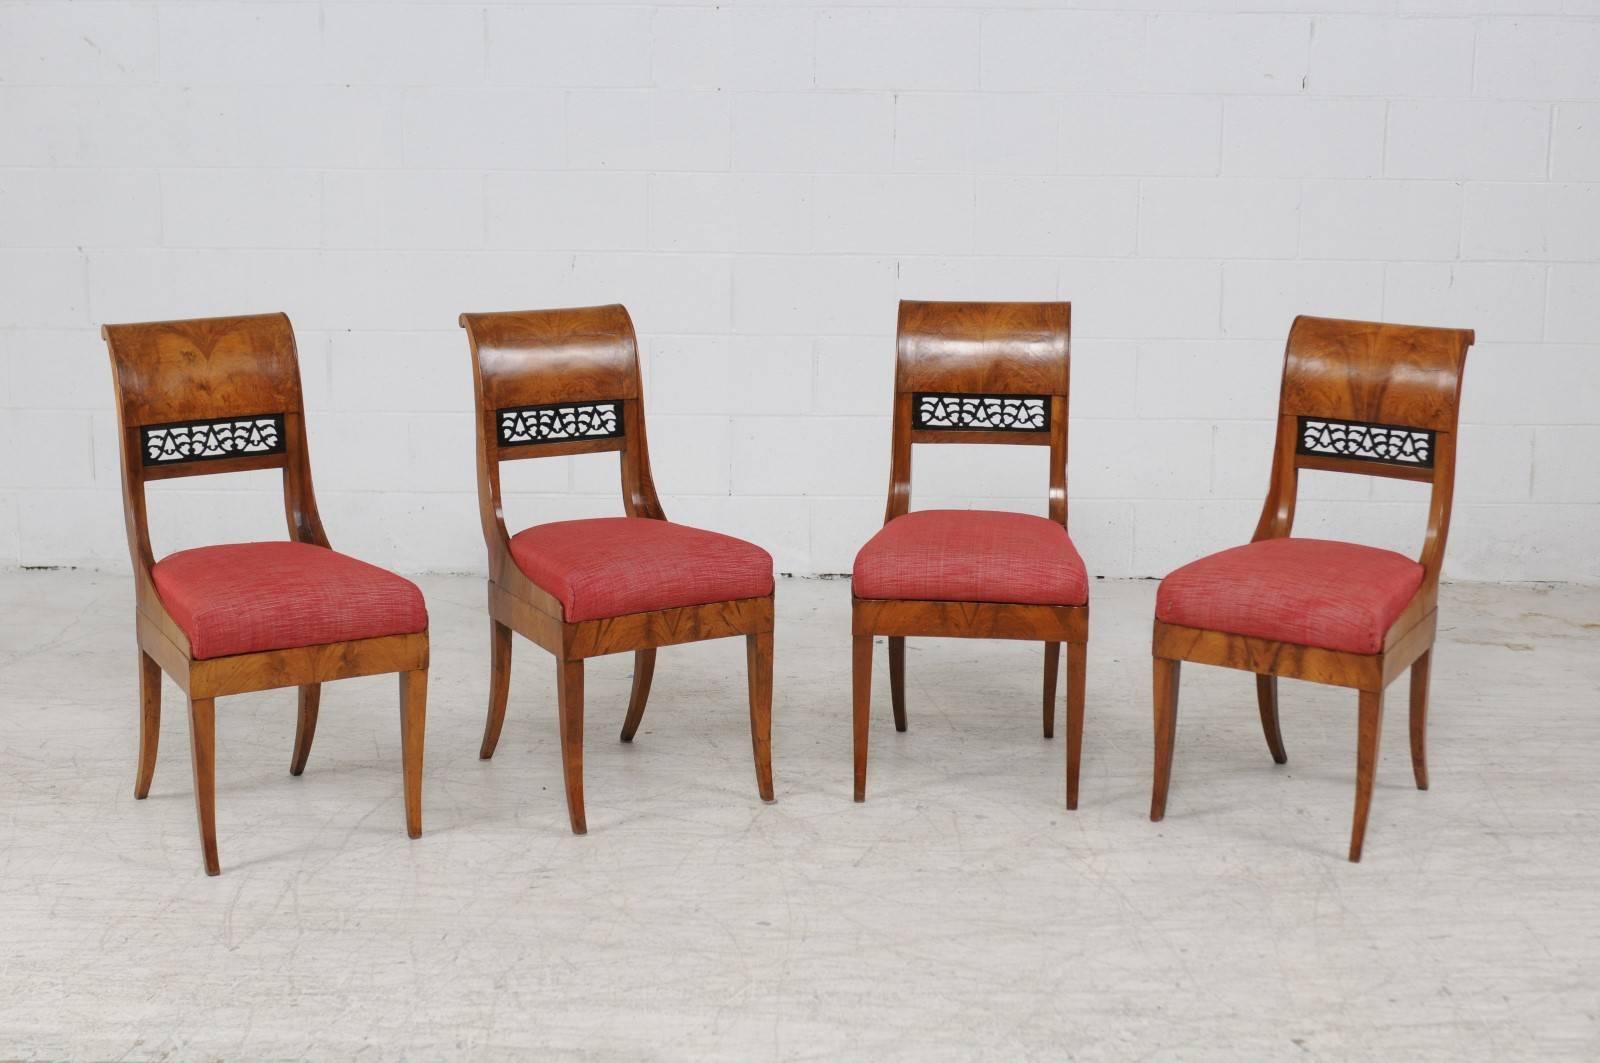 Set of Four 1840s Austrian Biedermeier Period Chairs with Bookmarked Veneer In Good Condition For Sale In Atlanta, GA